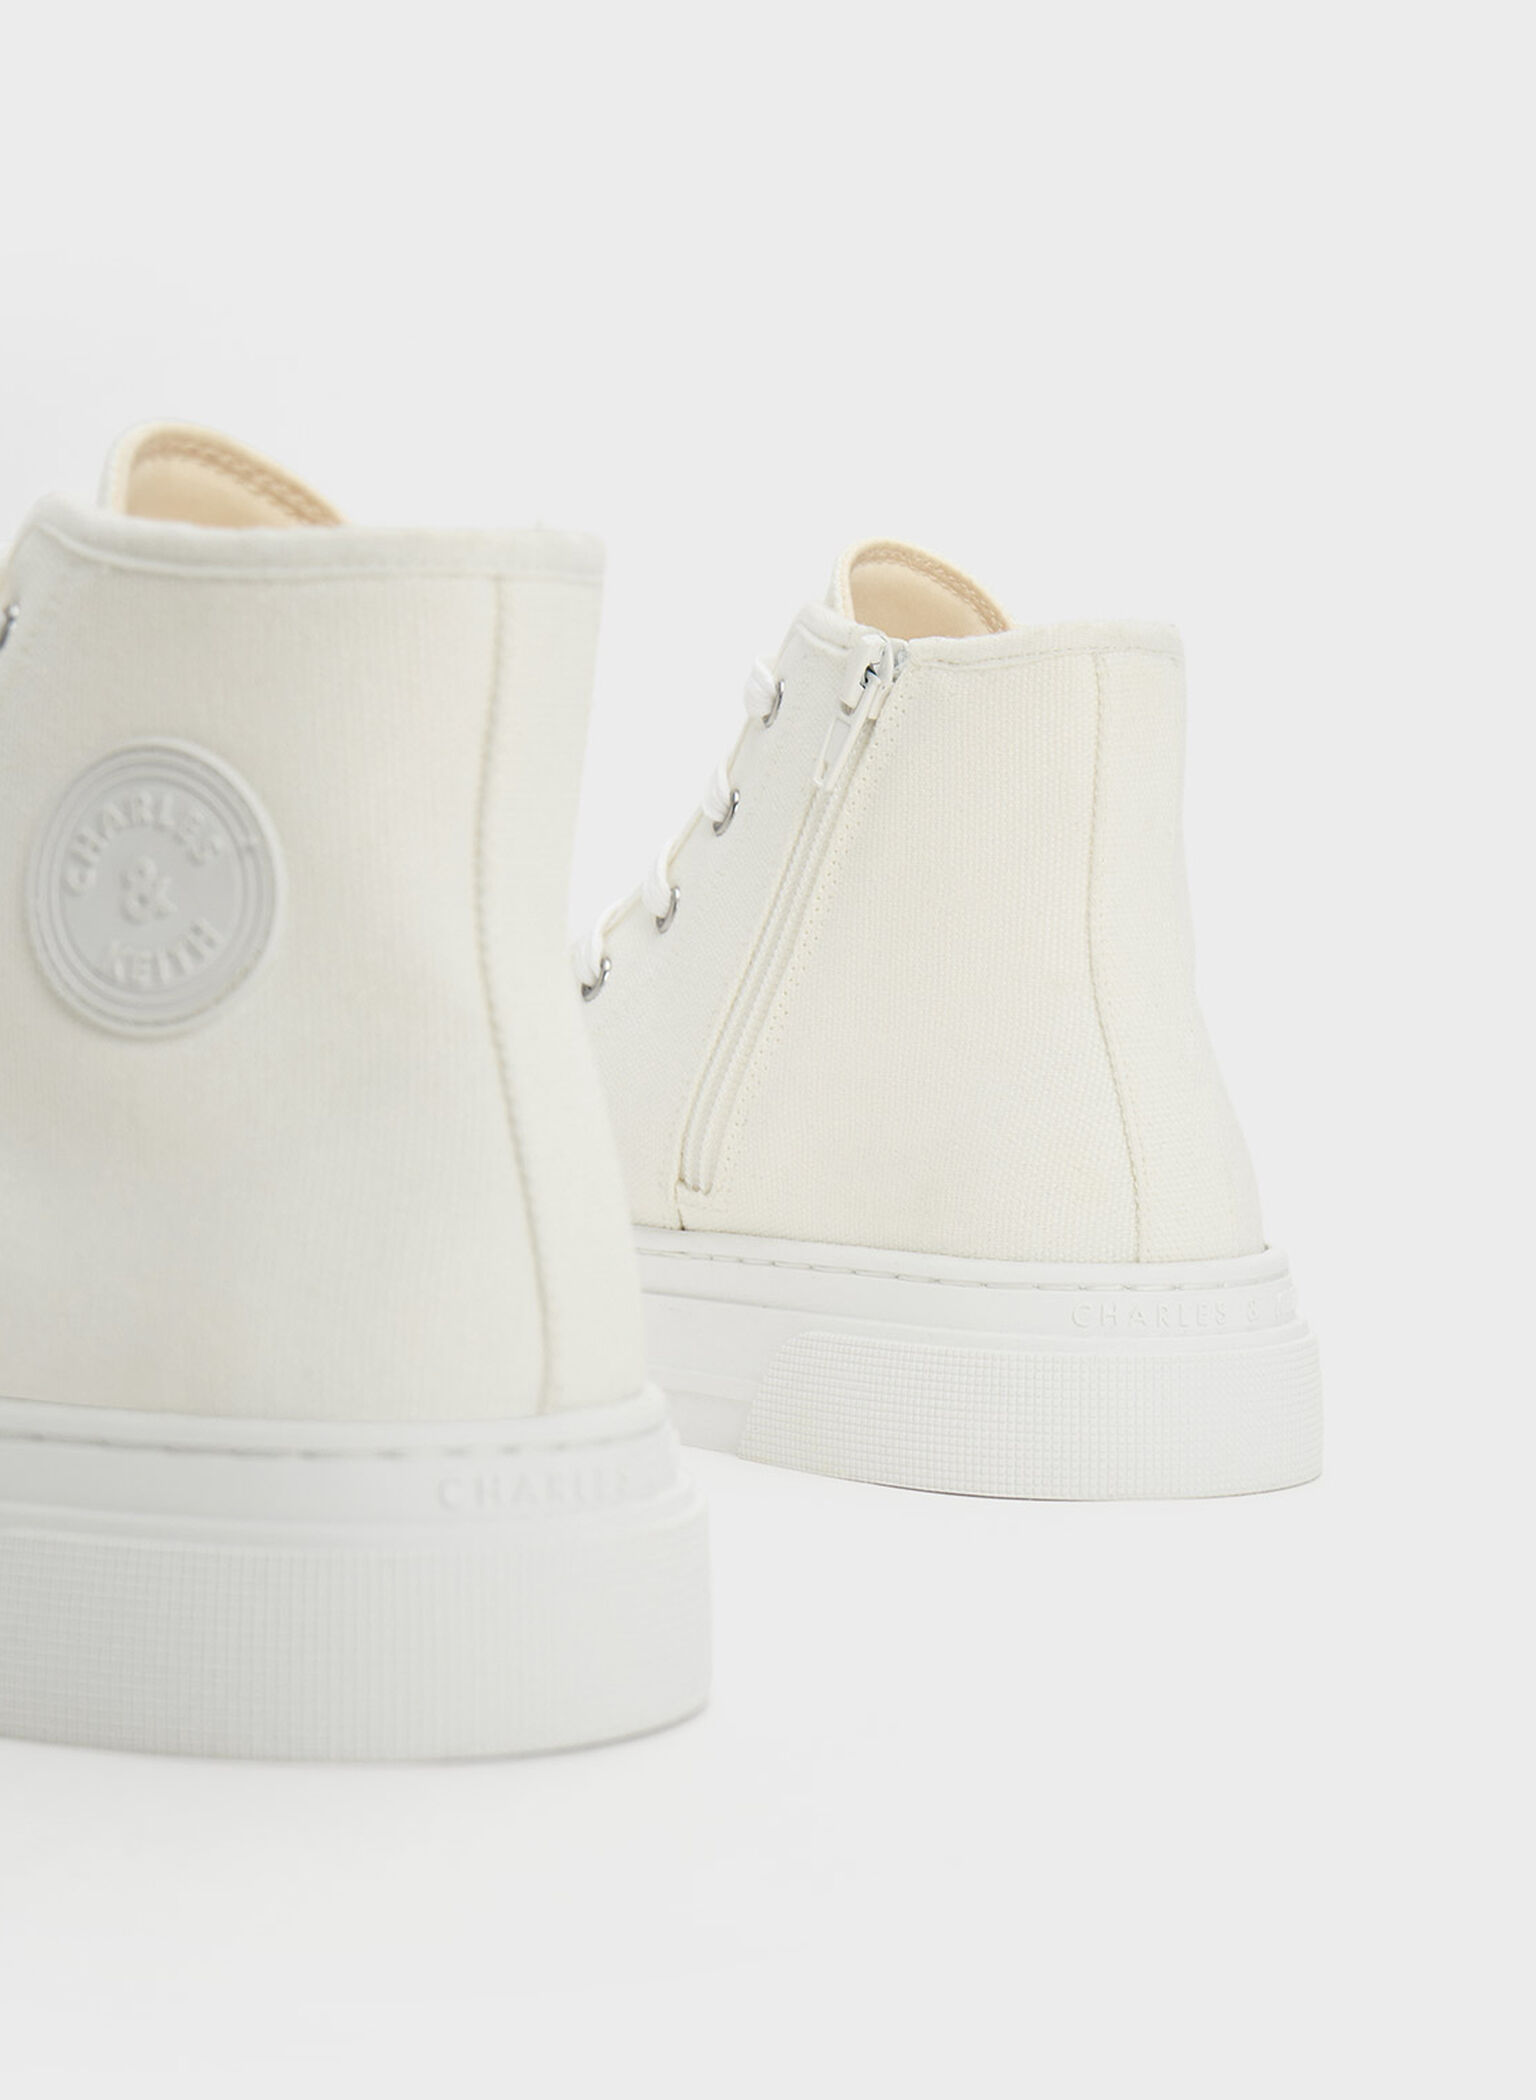 White Kay Canvas High-Top Sneakers - CHARLES & KEITH US